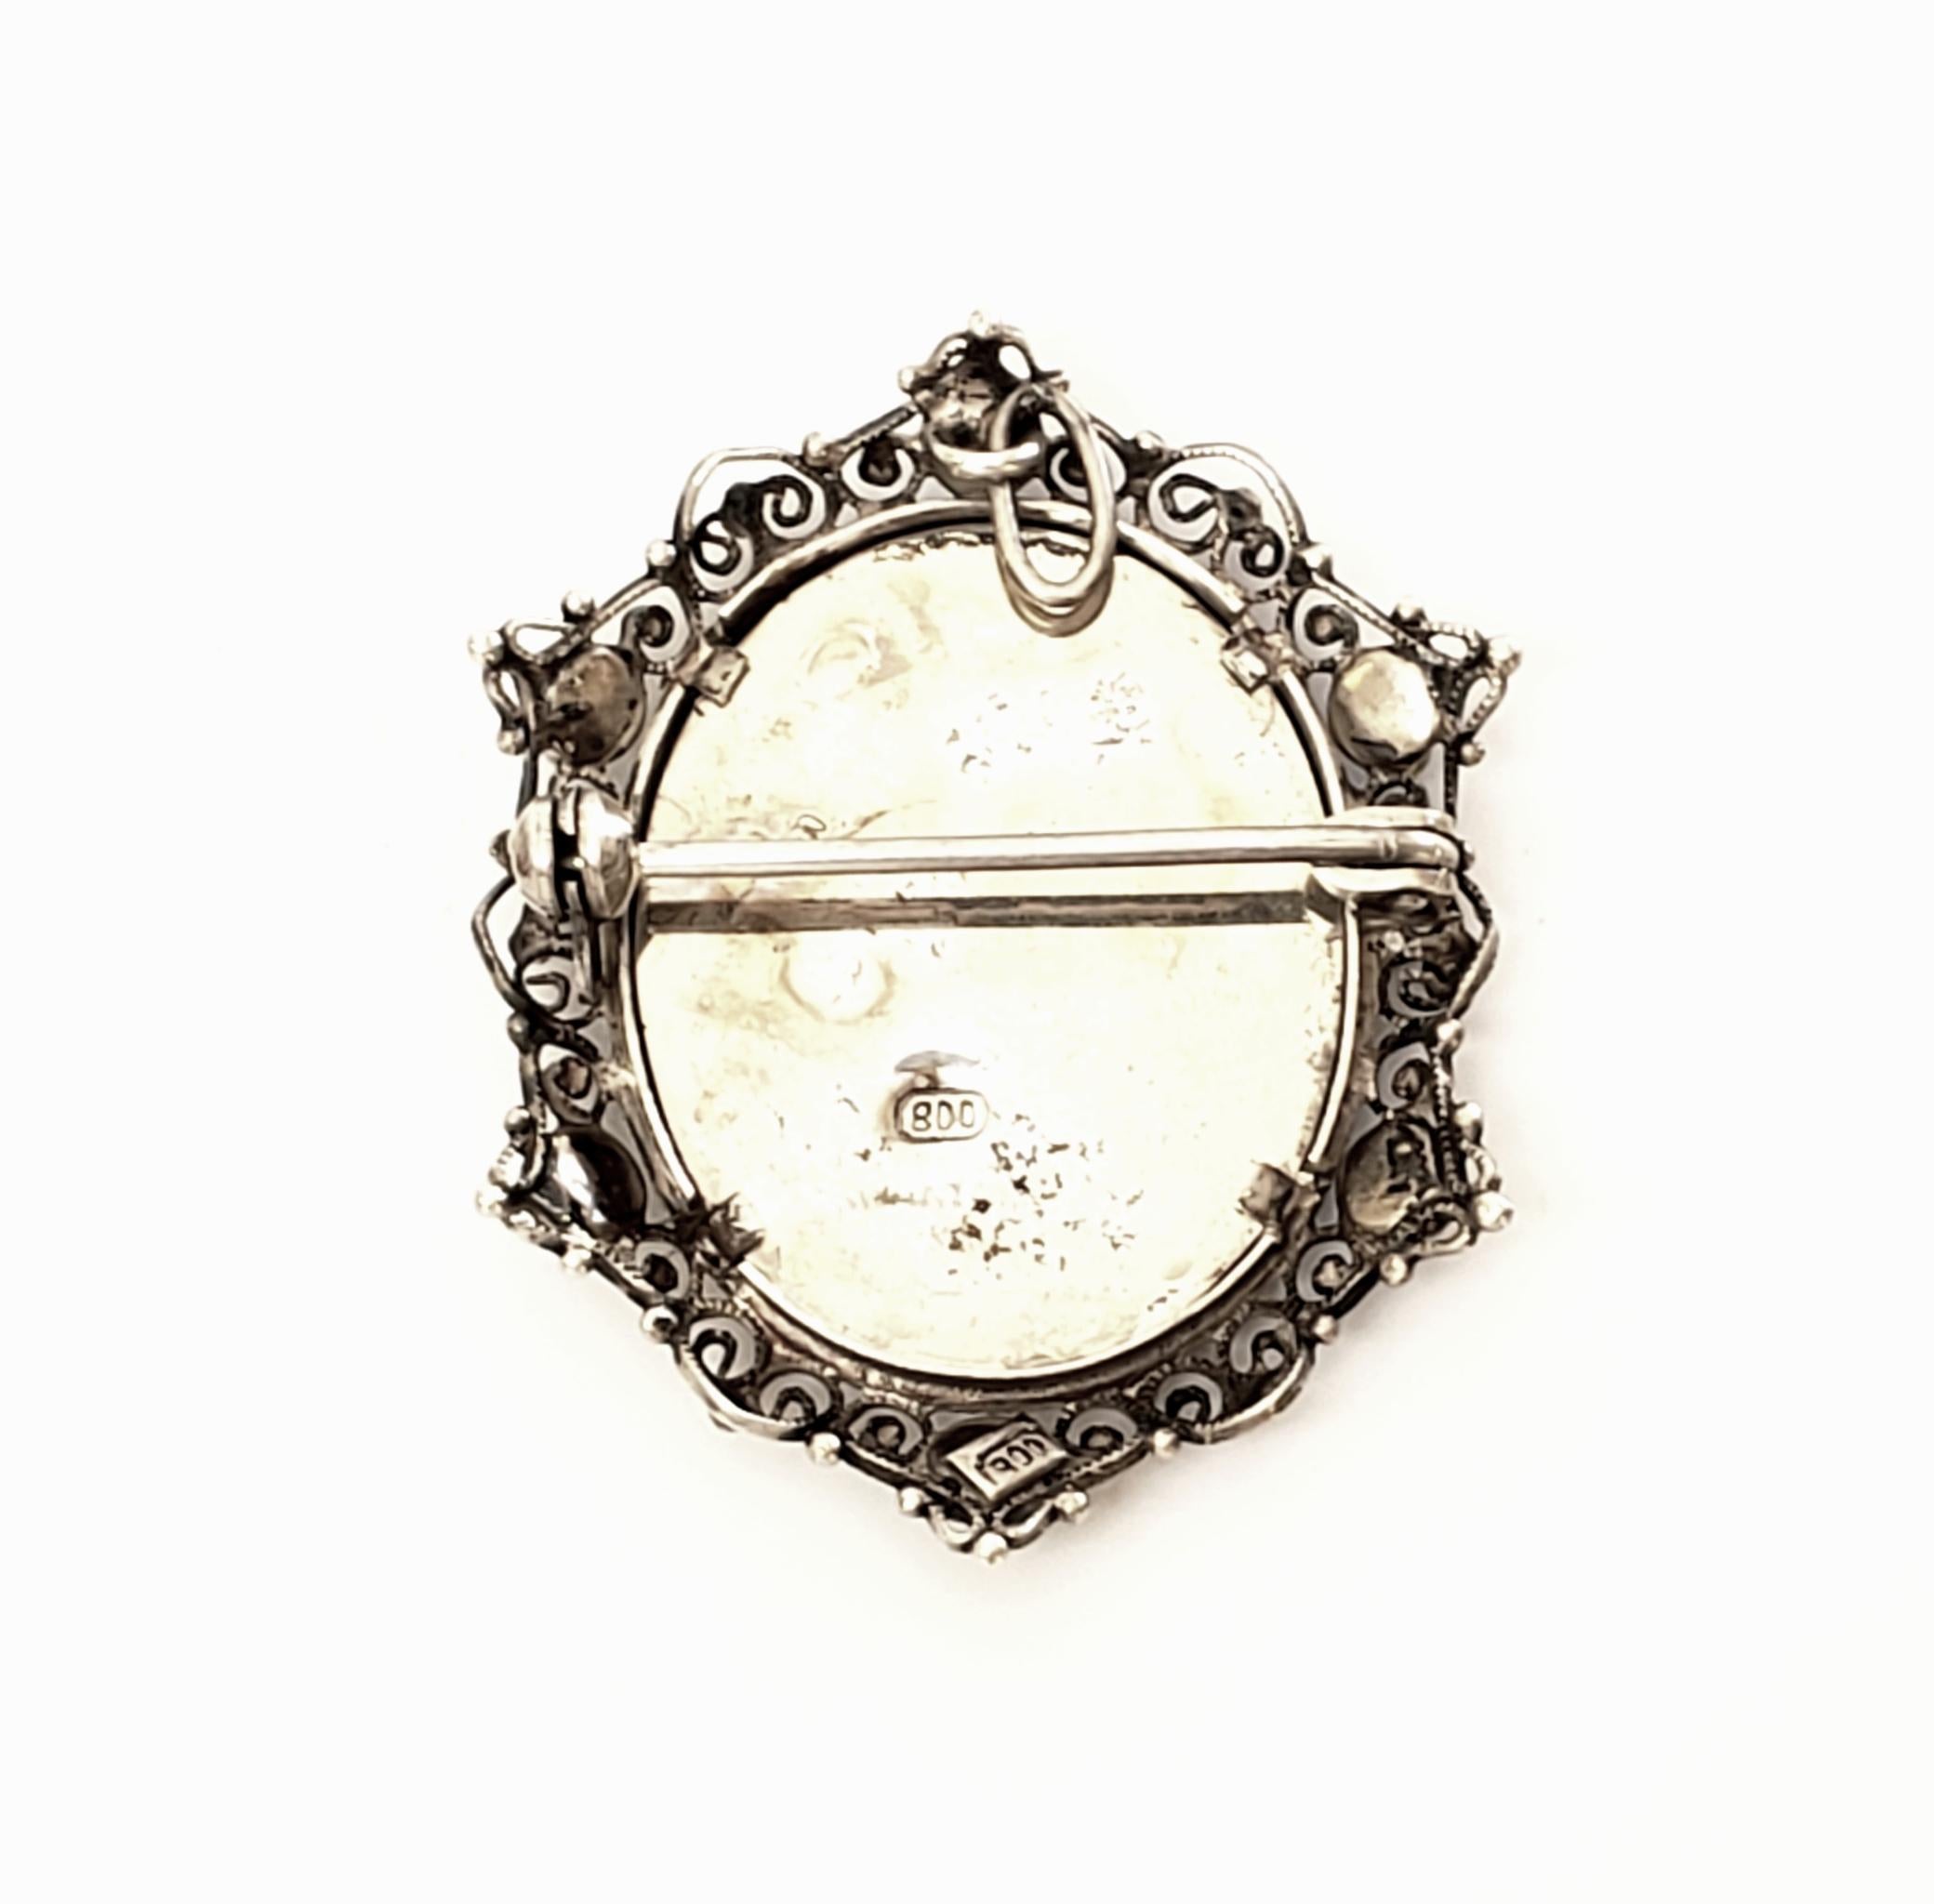 800 silver and blue bead portrait pin and pendant.

This beautiful piece can be worn as a pin or a pendant, features a hand painted lady's portrait in a 800 silver filigree frame with small blue beads.

Measures 1 1/2